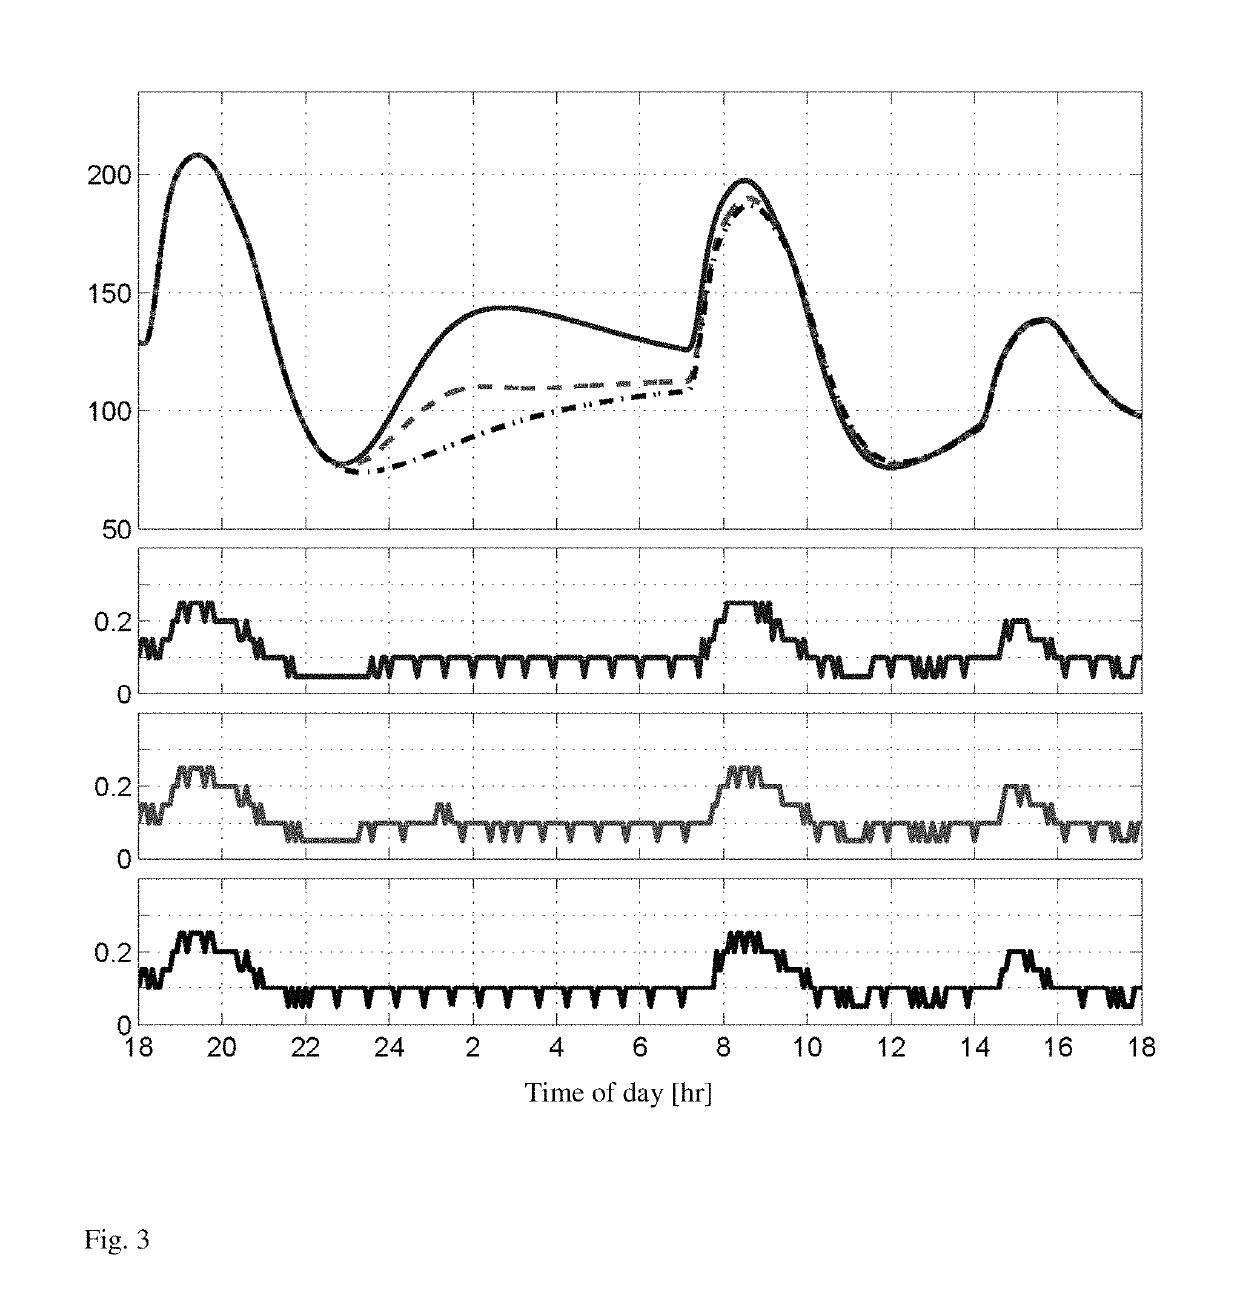 Daily periodic target-zone modulation in the model predictive control problem for artificial pancreas for type I diabetes applications